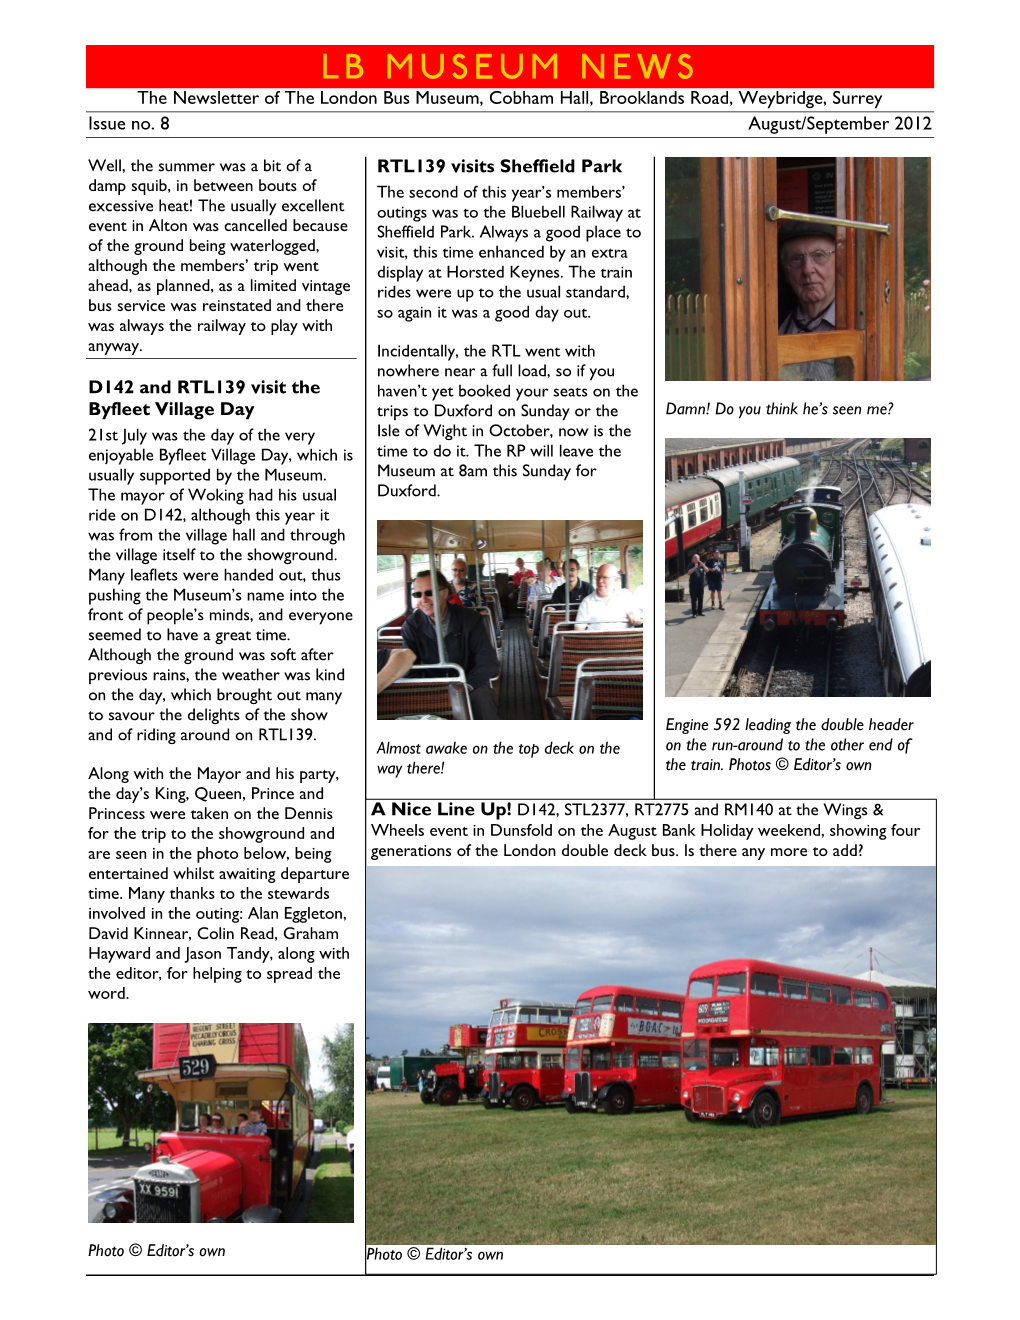 LB MUSEUM NEWS the Newsletter of the London Bus Museum, Cobham Hall, Brooklands Road, Weybridge, Surrey Issue No